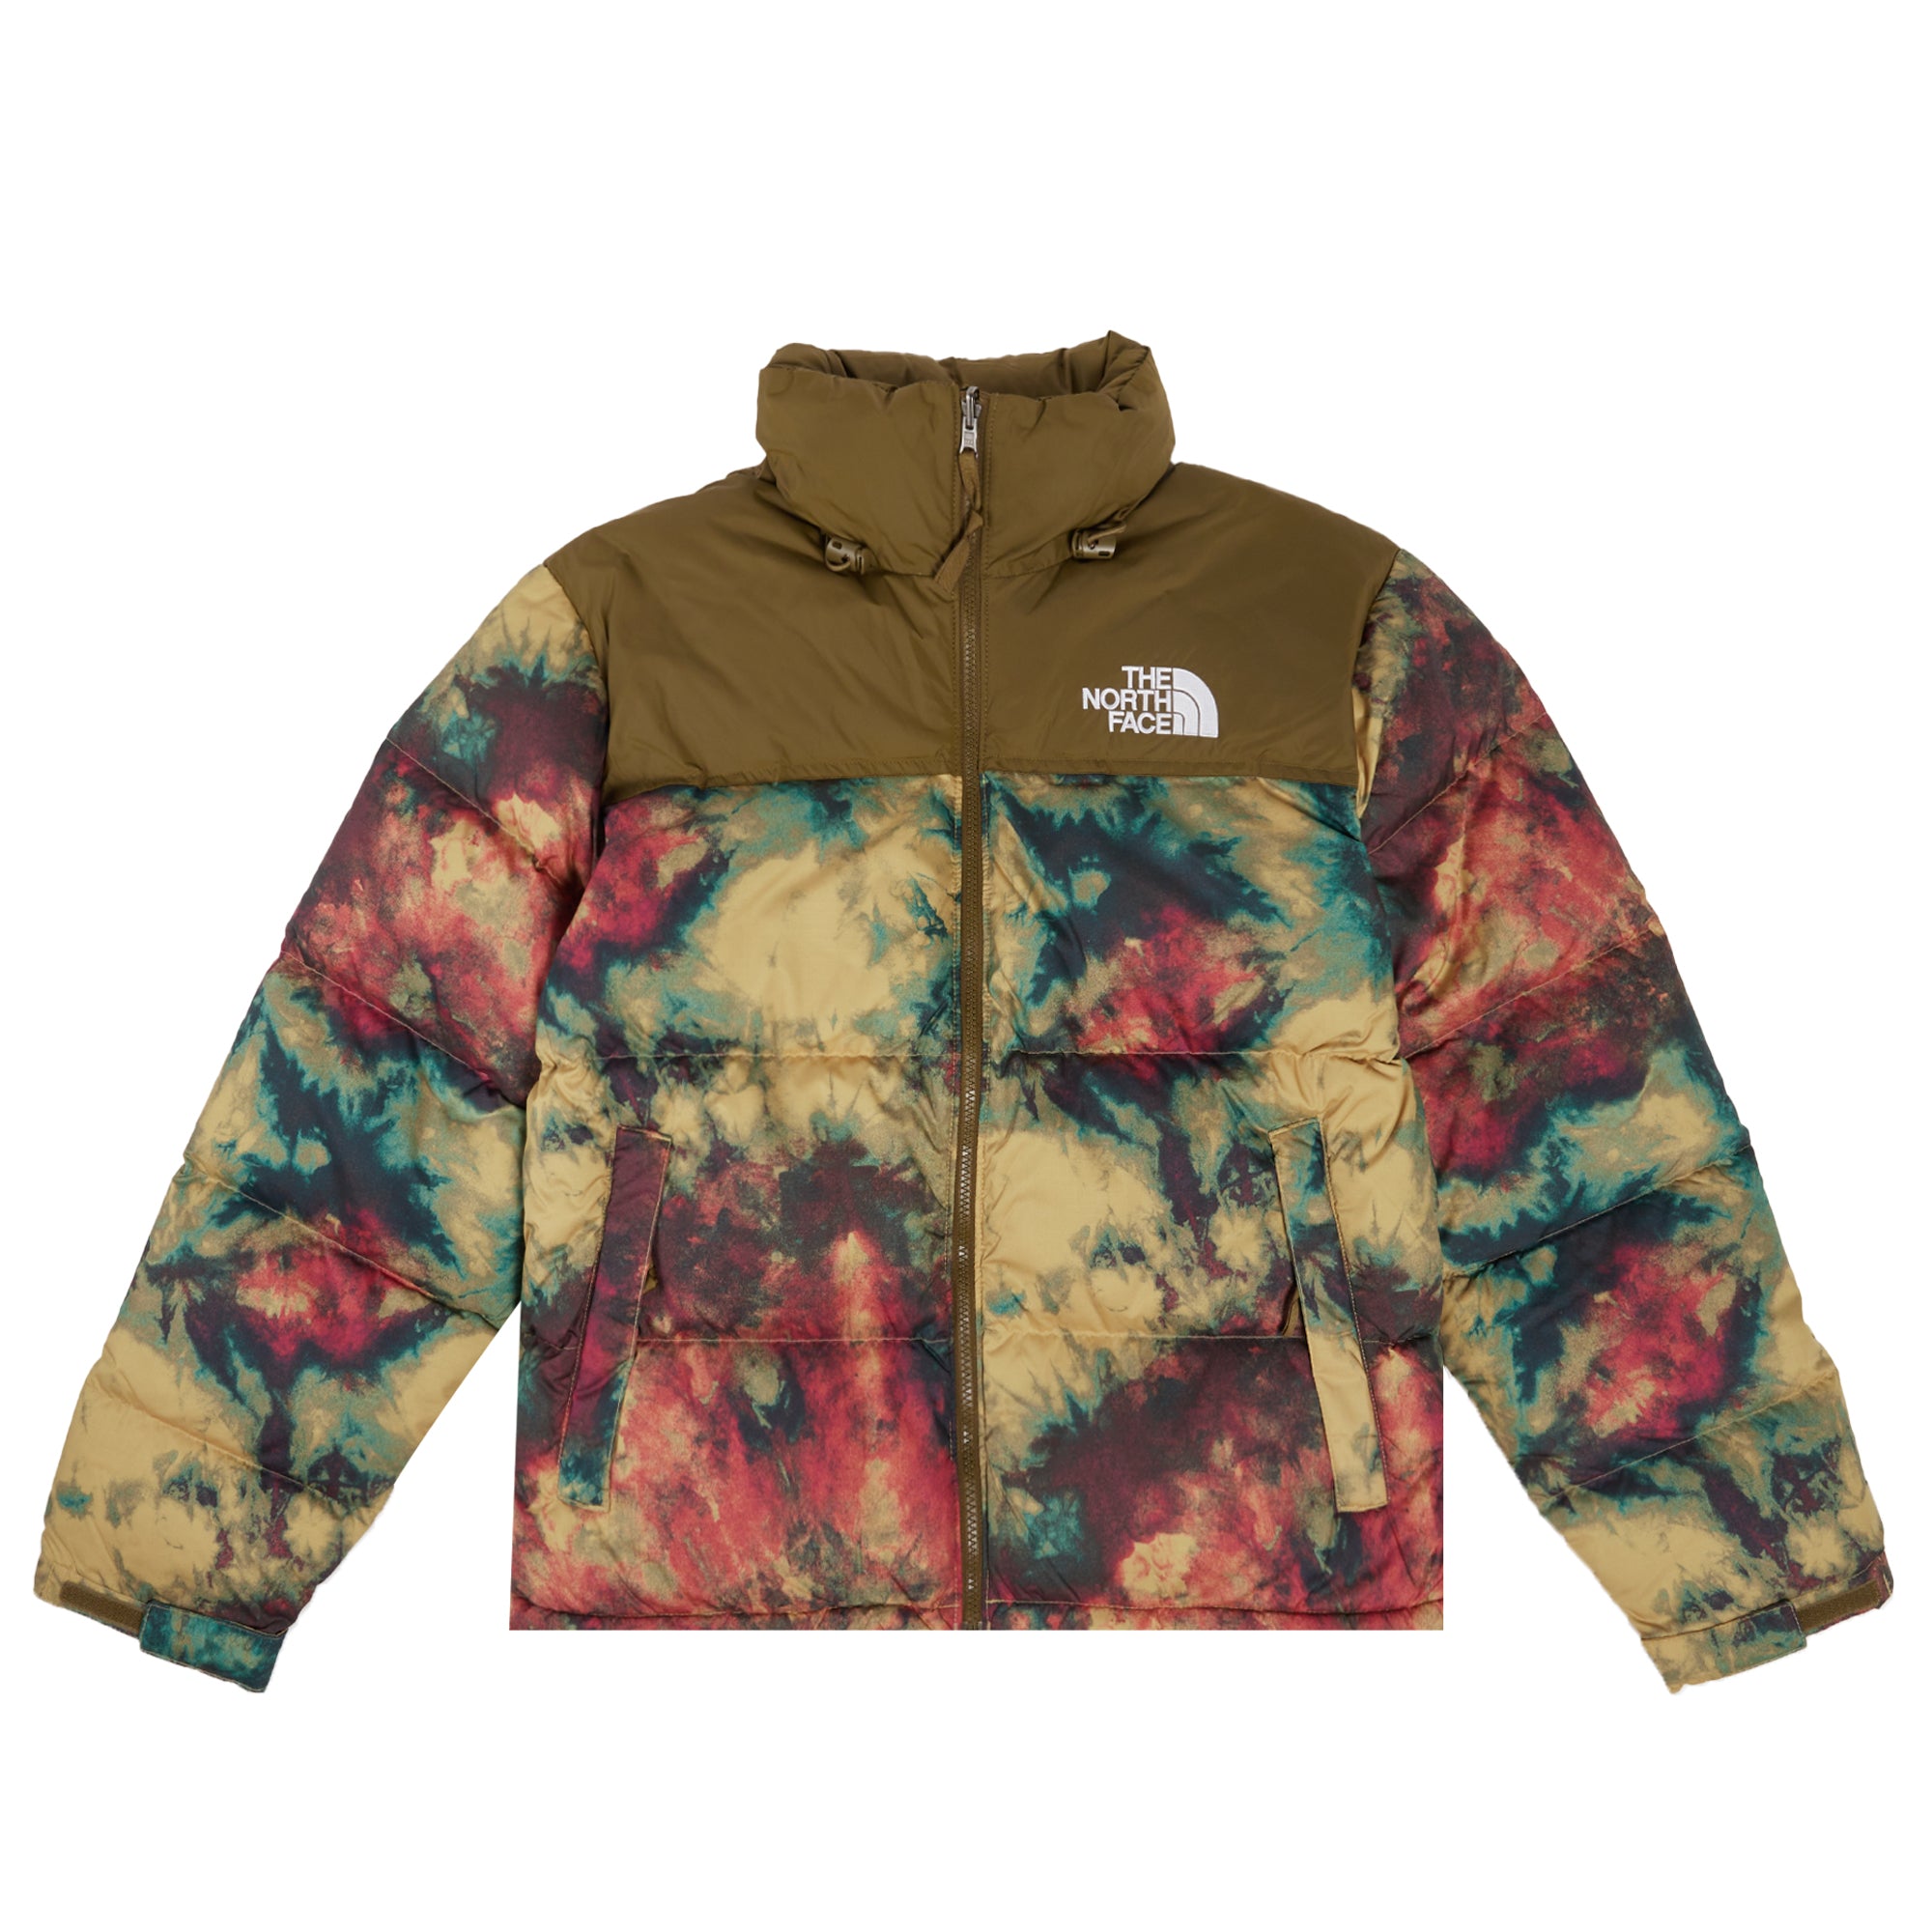 The North Face Retro Jacket Dye Print | – Off The Hook